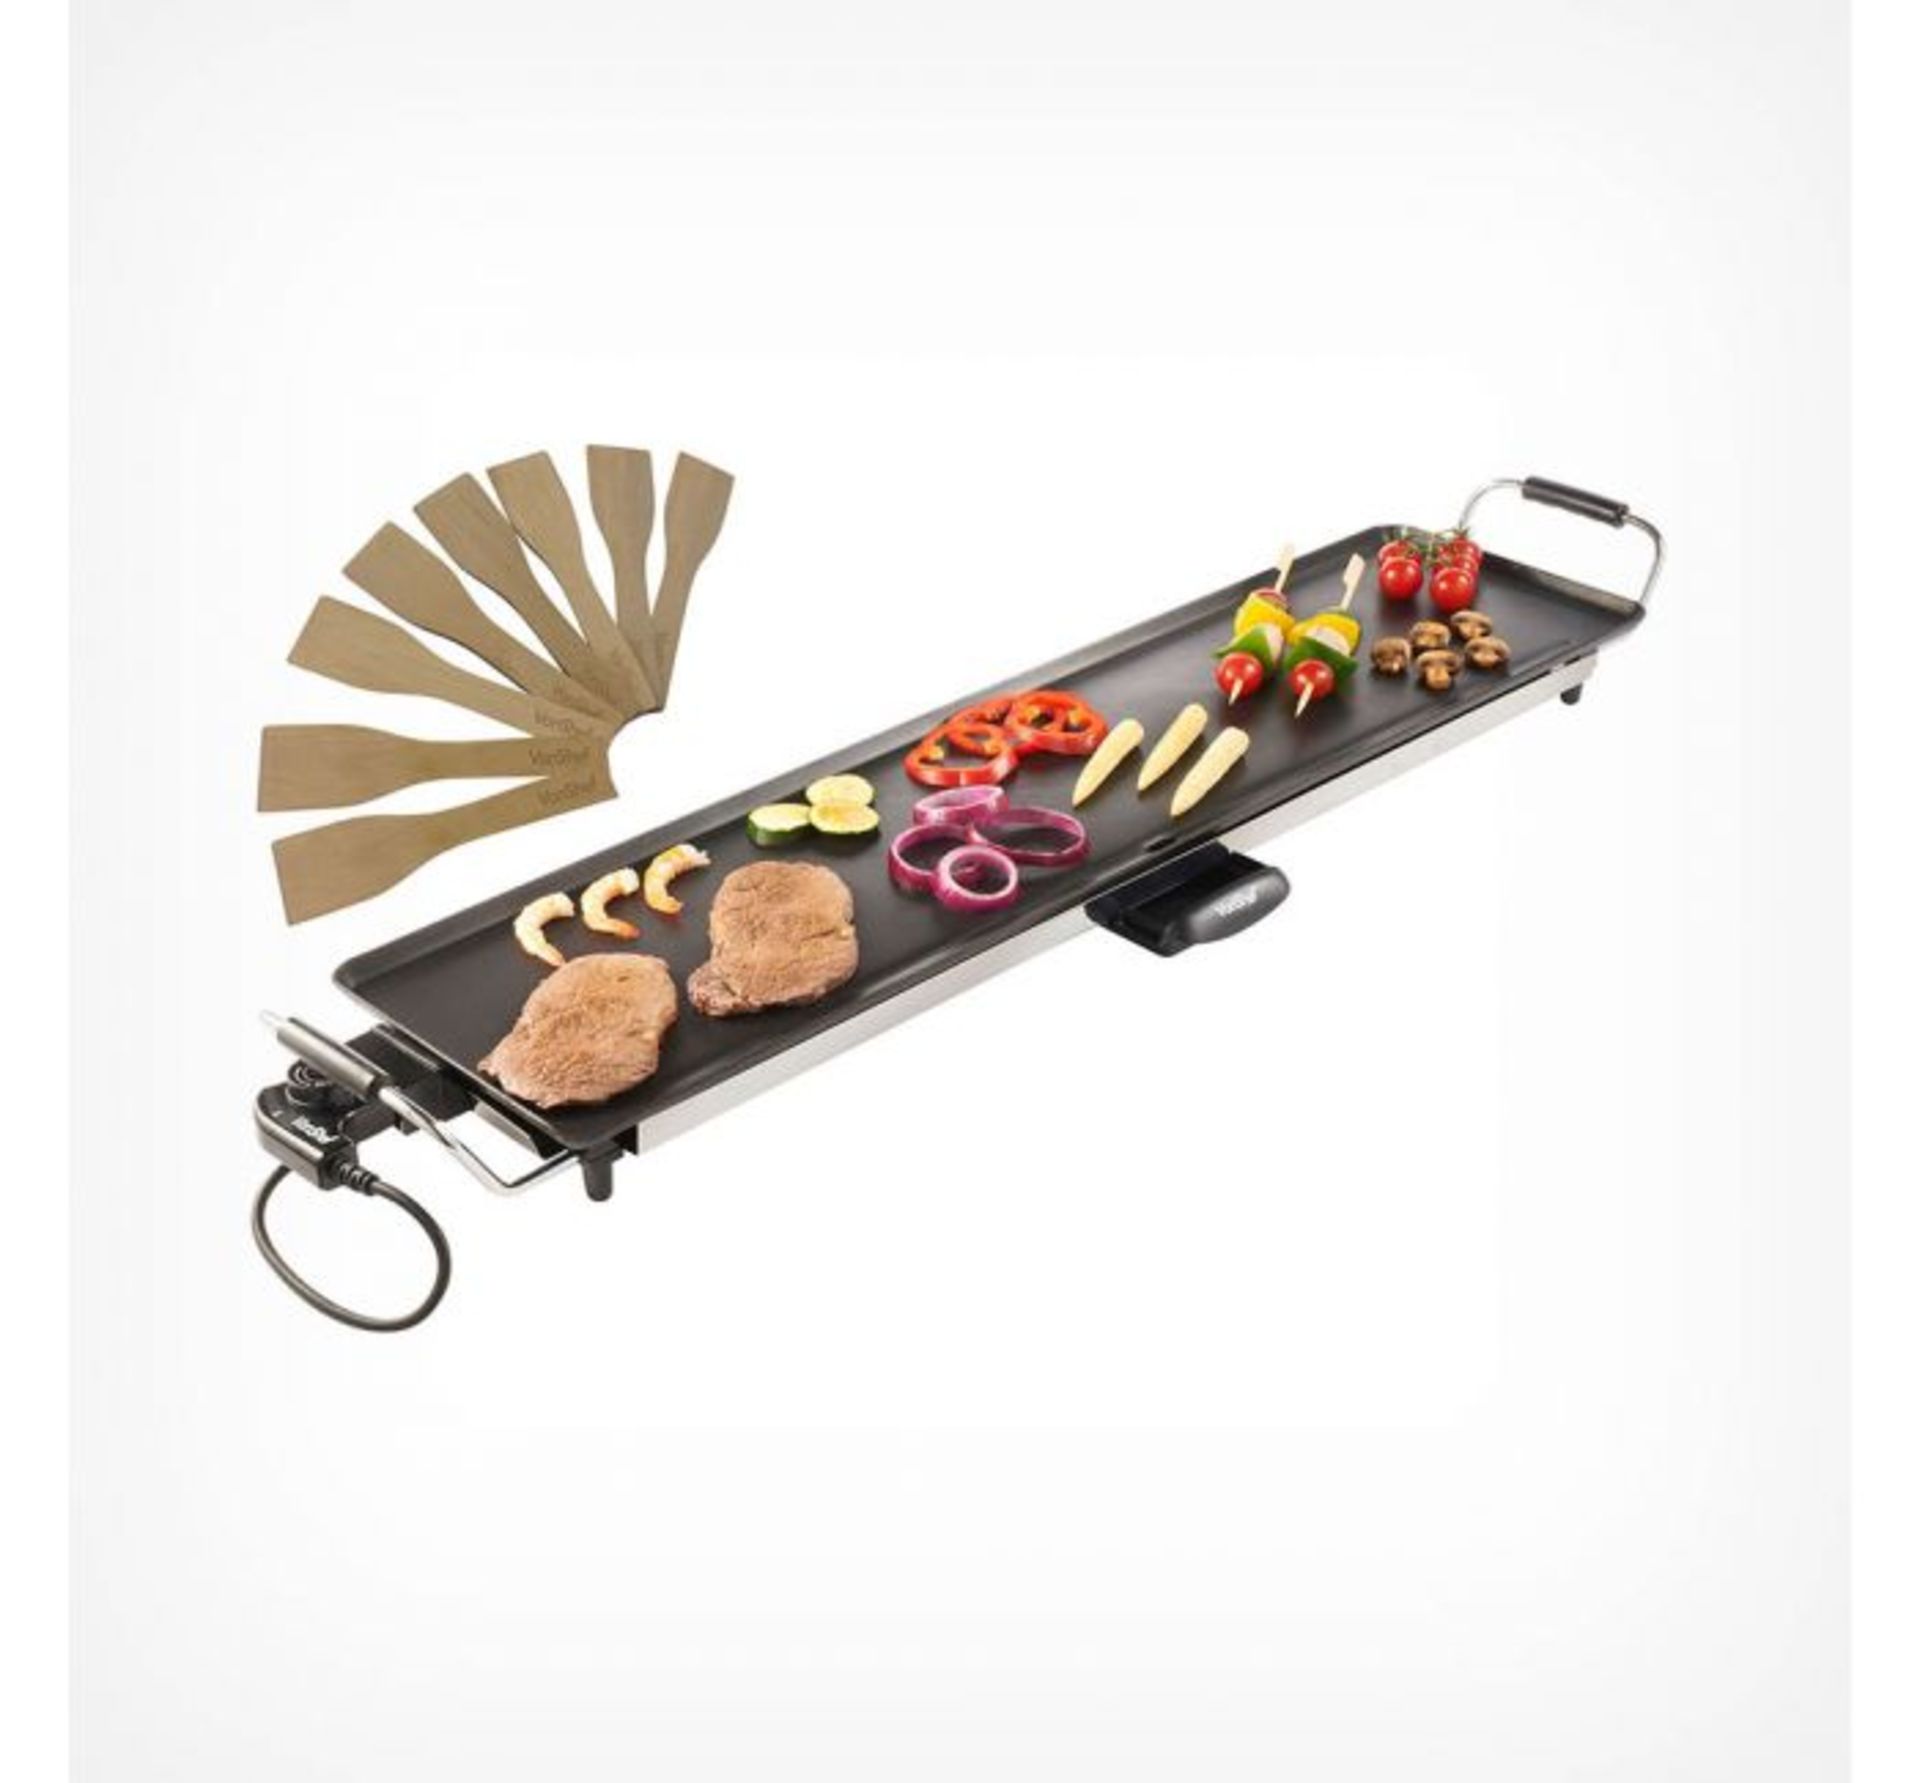 (OM94) XXL Teppanyaki Grill Incredibly Versatile for Meat, Vegetables, Fish and Fried Dishes ... - Image 2 of 3